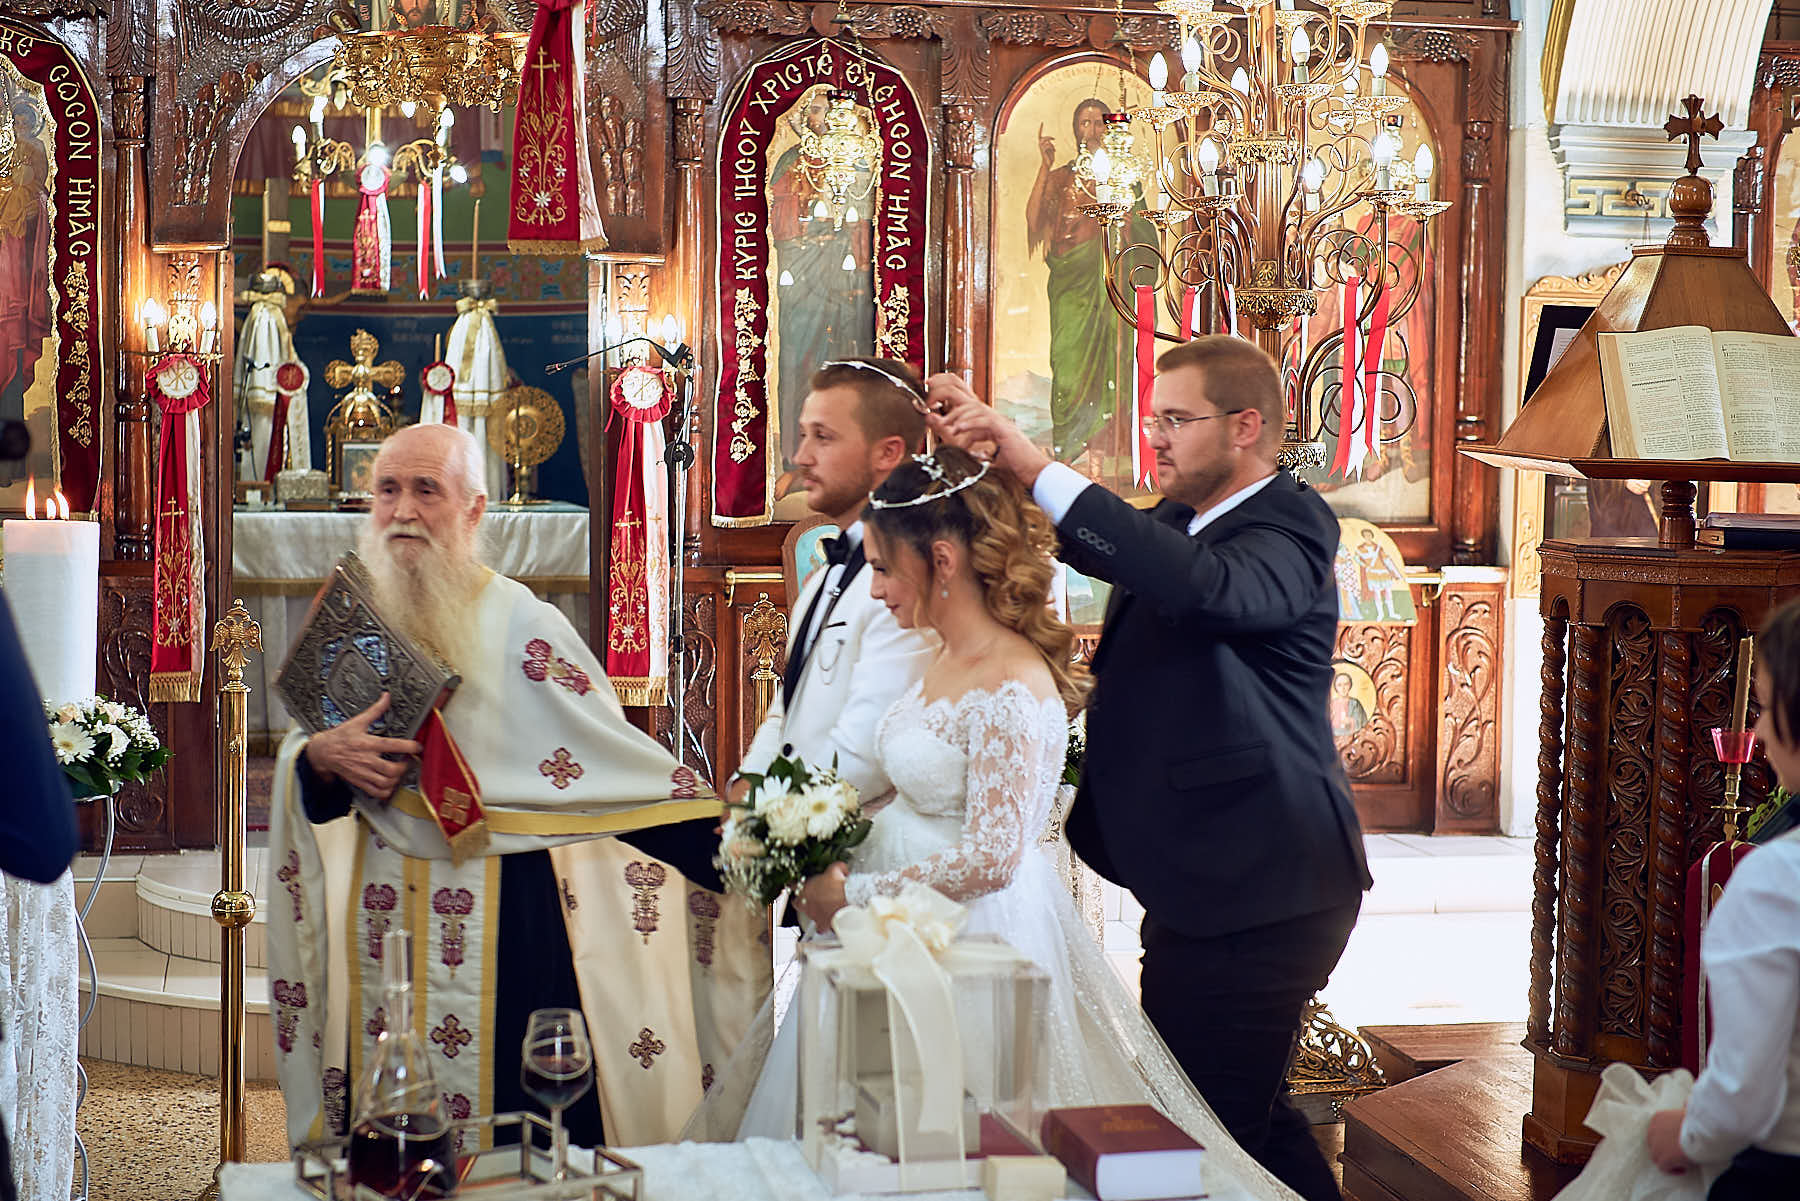 Groom, bride, friend (putting wedding crowns) and priest in the church, religious pictures